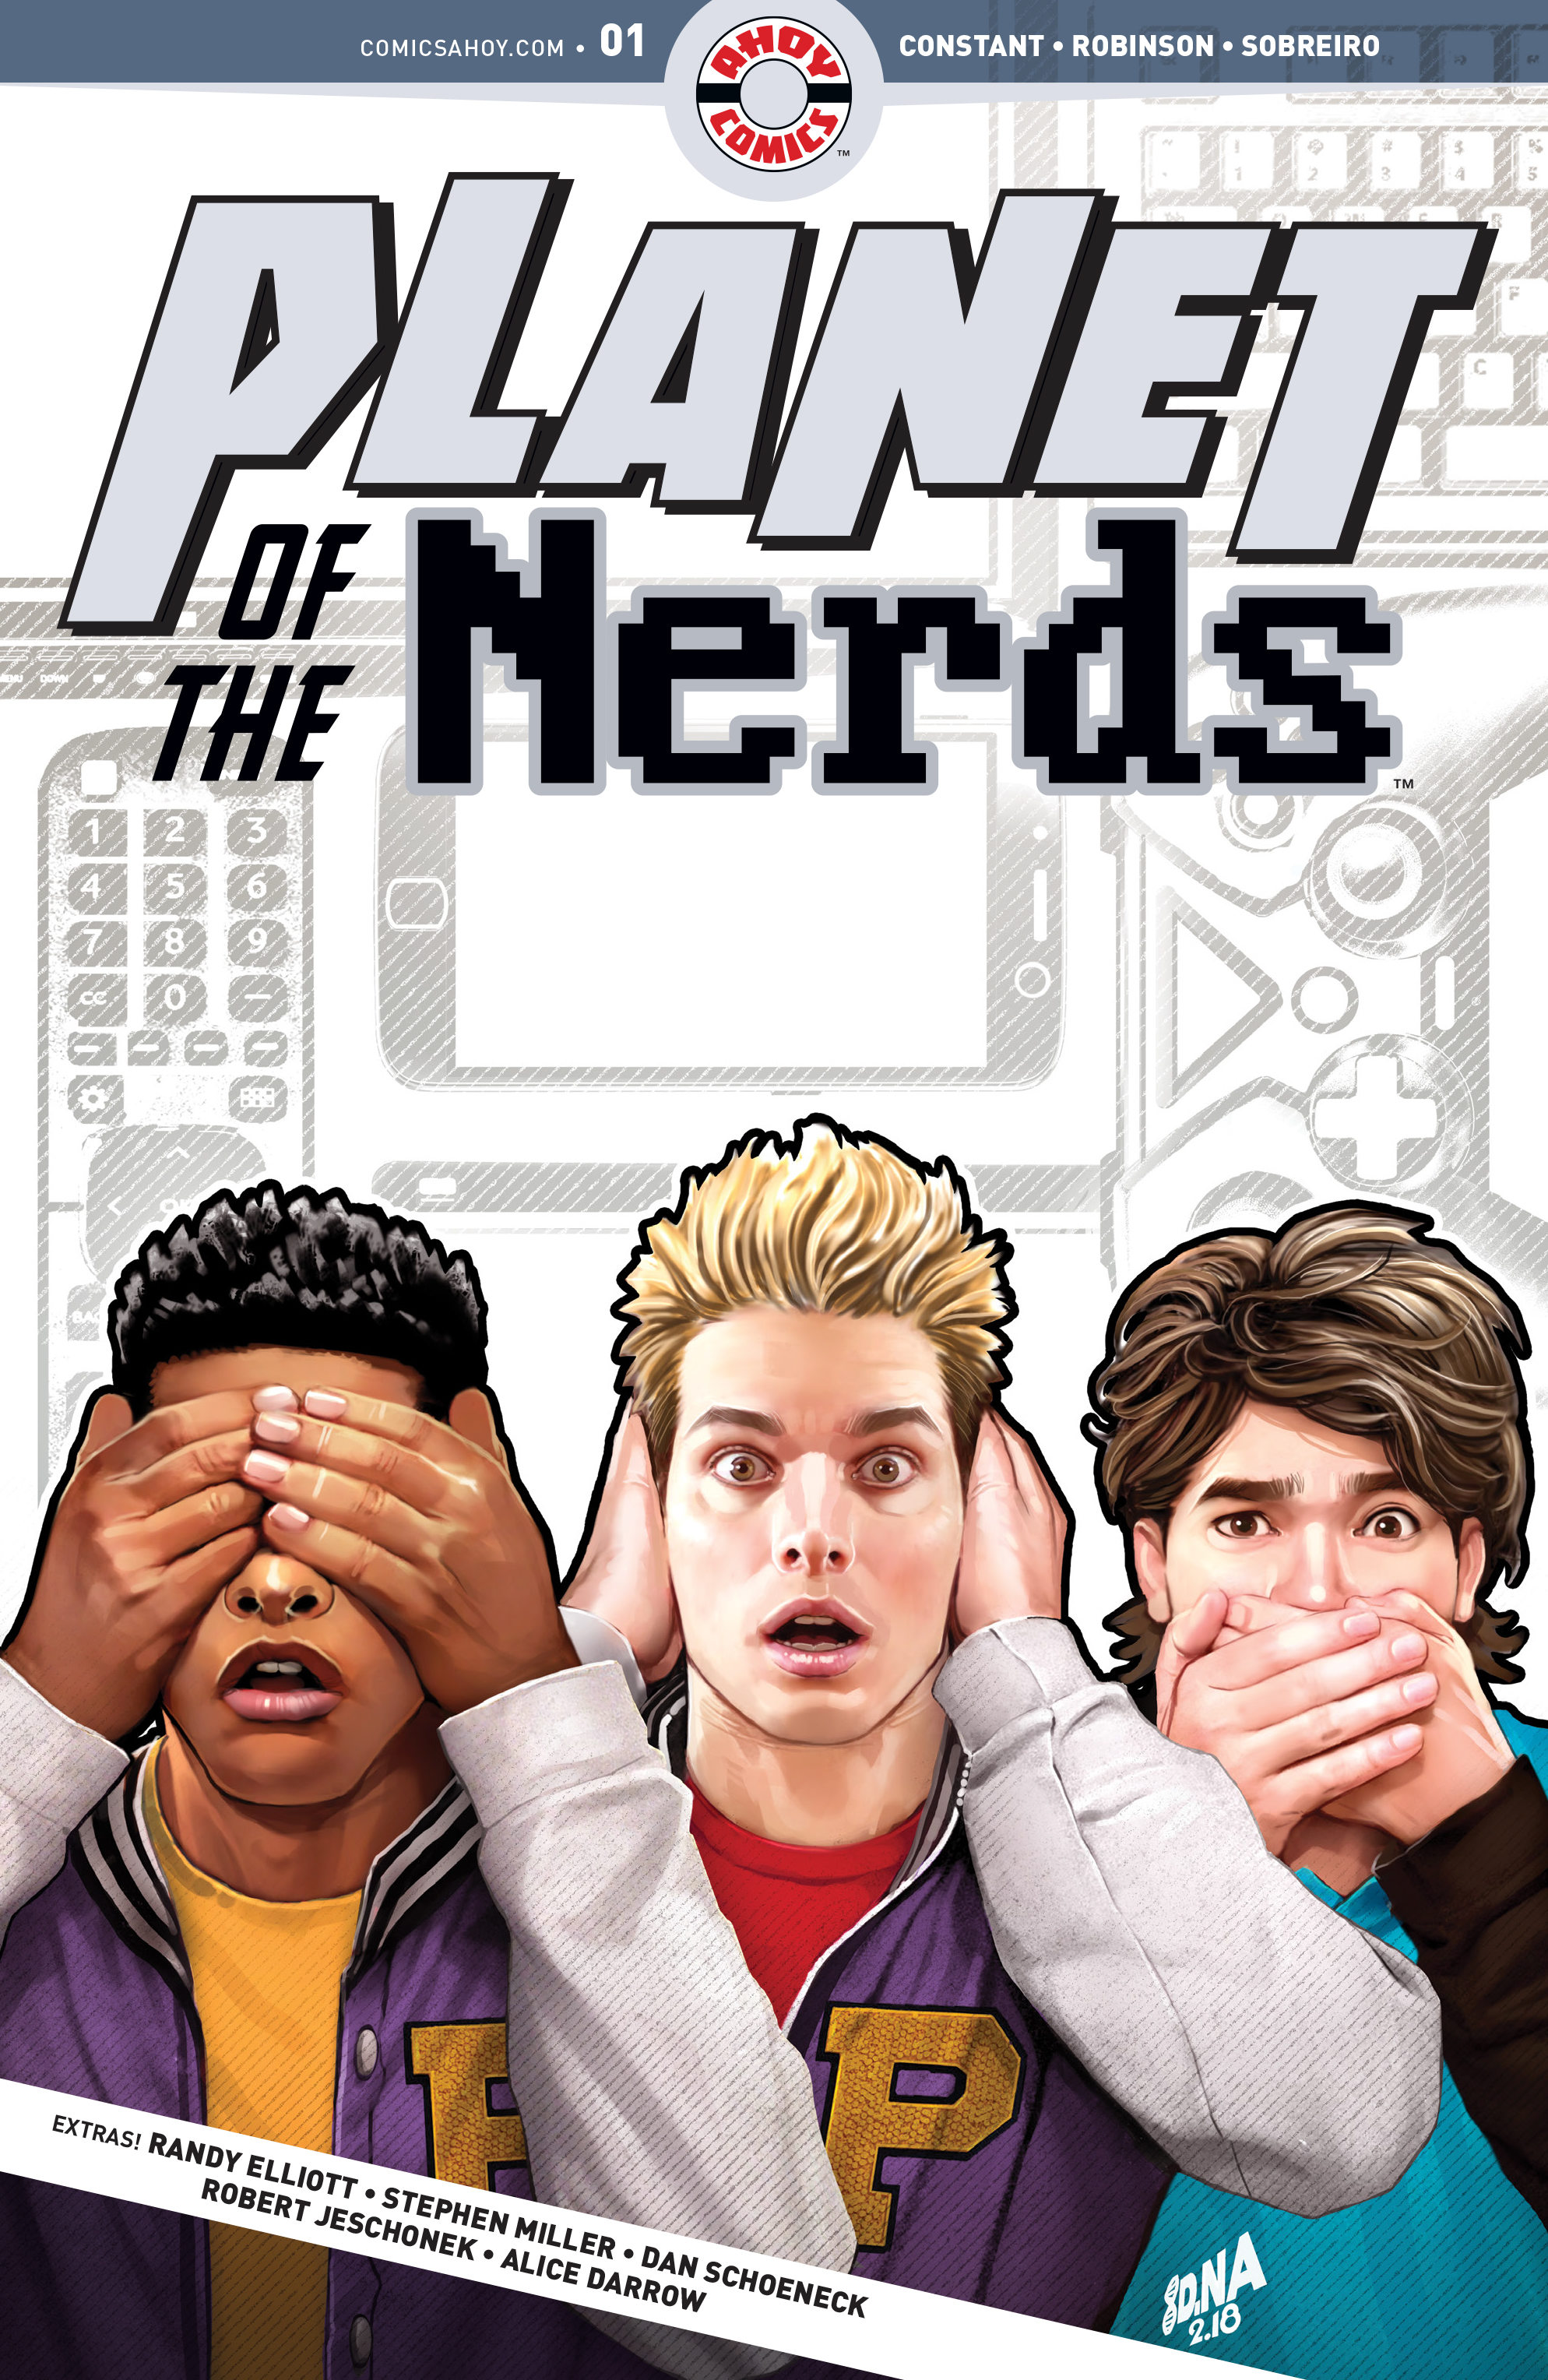 Read online Planet of the Nerds comic -  Issue #1 - 1